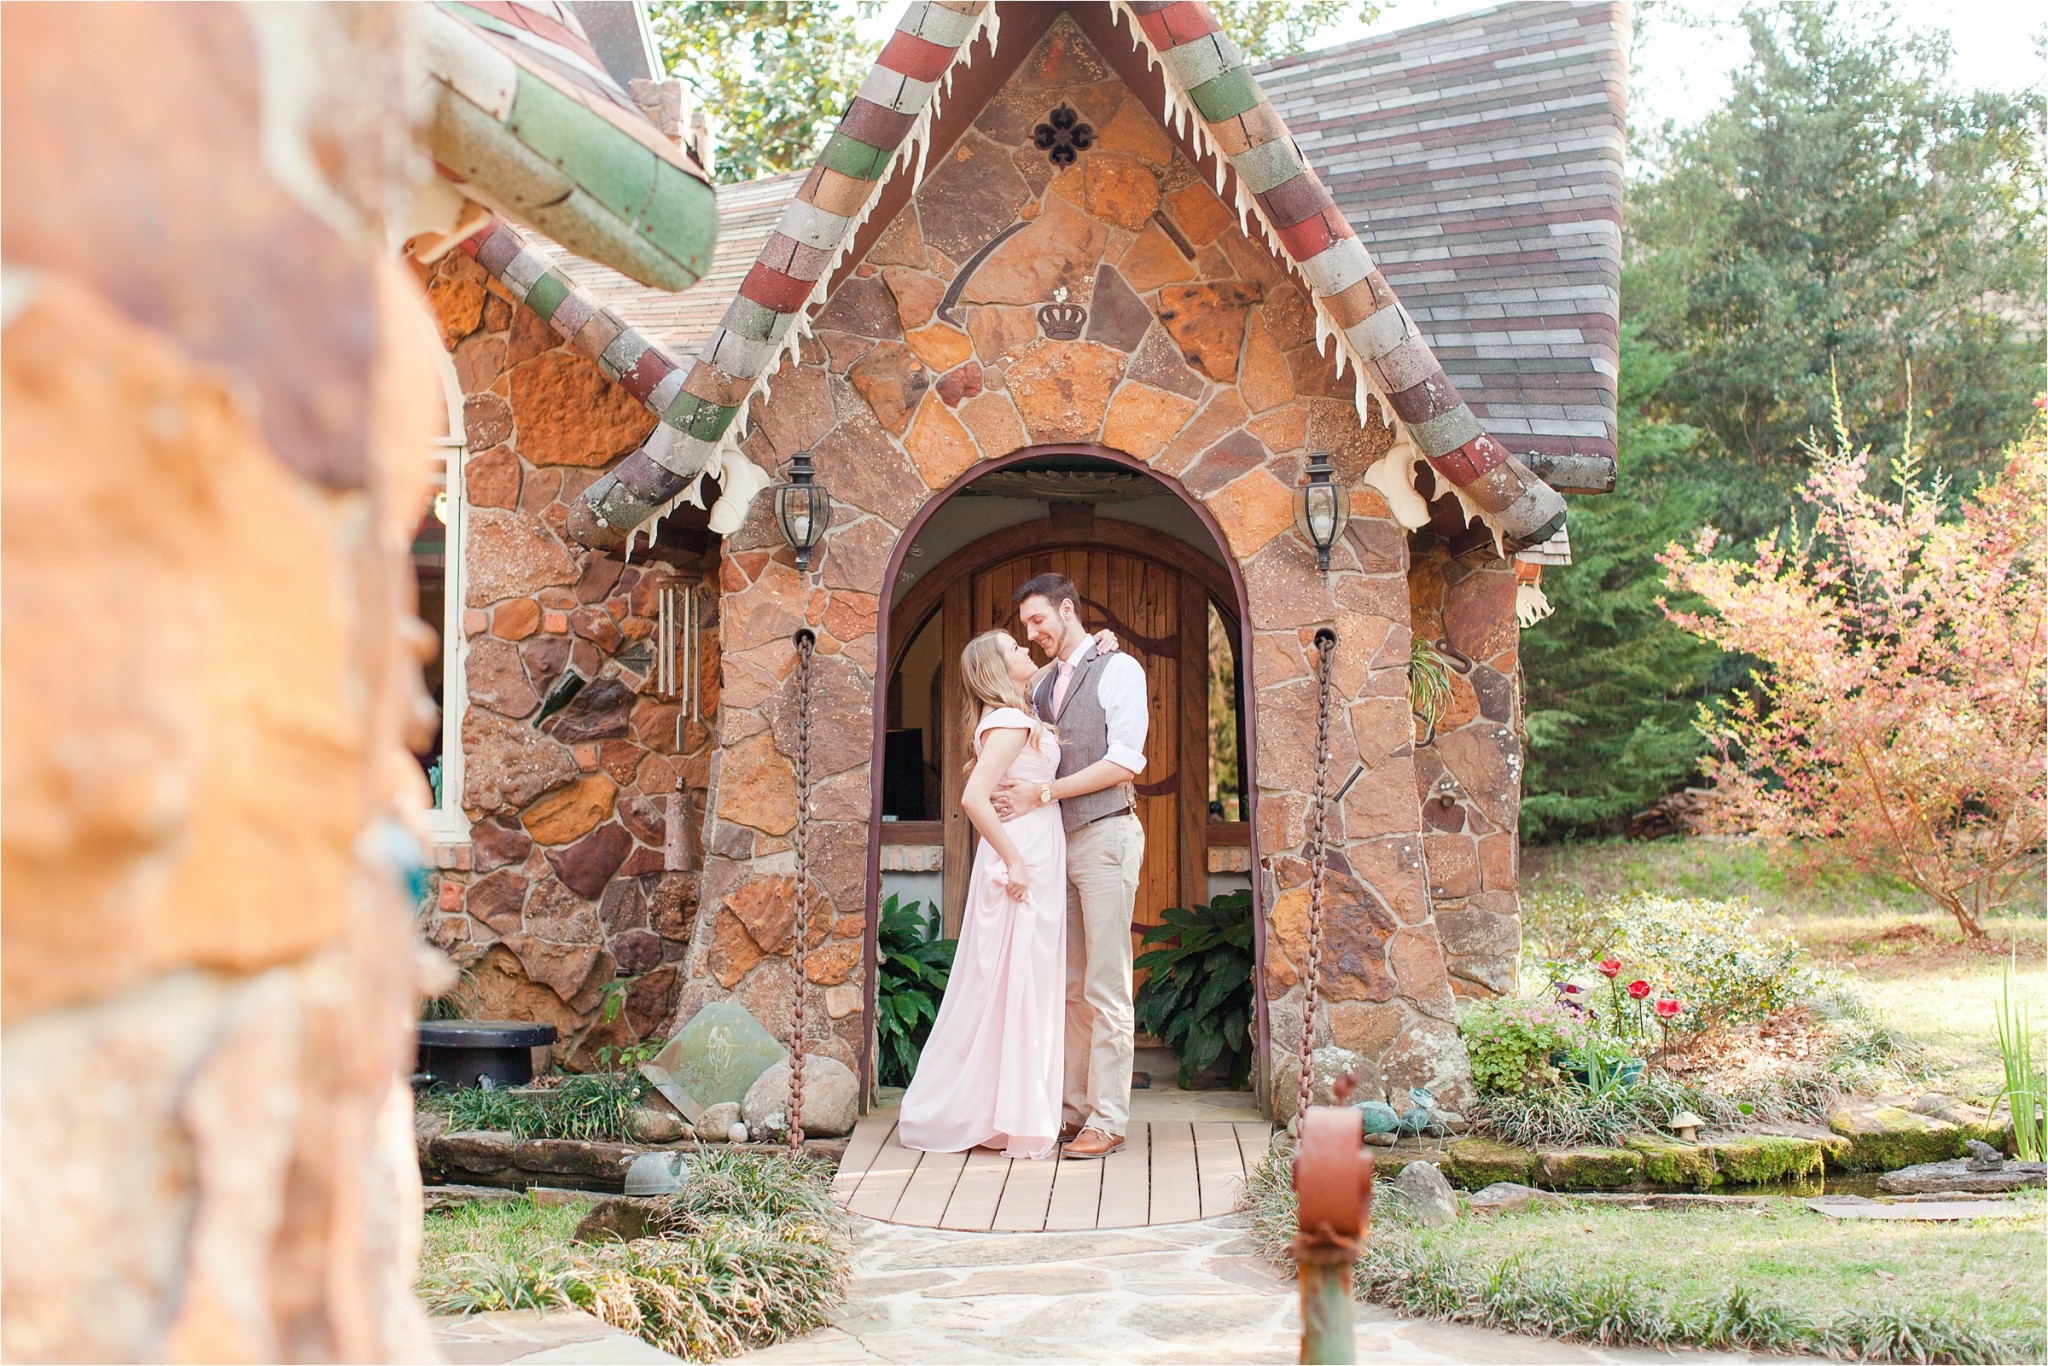 Fairytale inspired engagement session at Mosher Castle